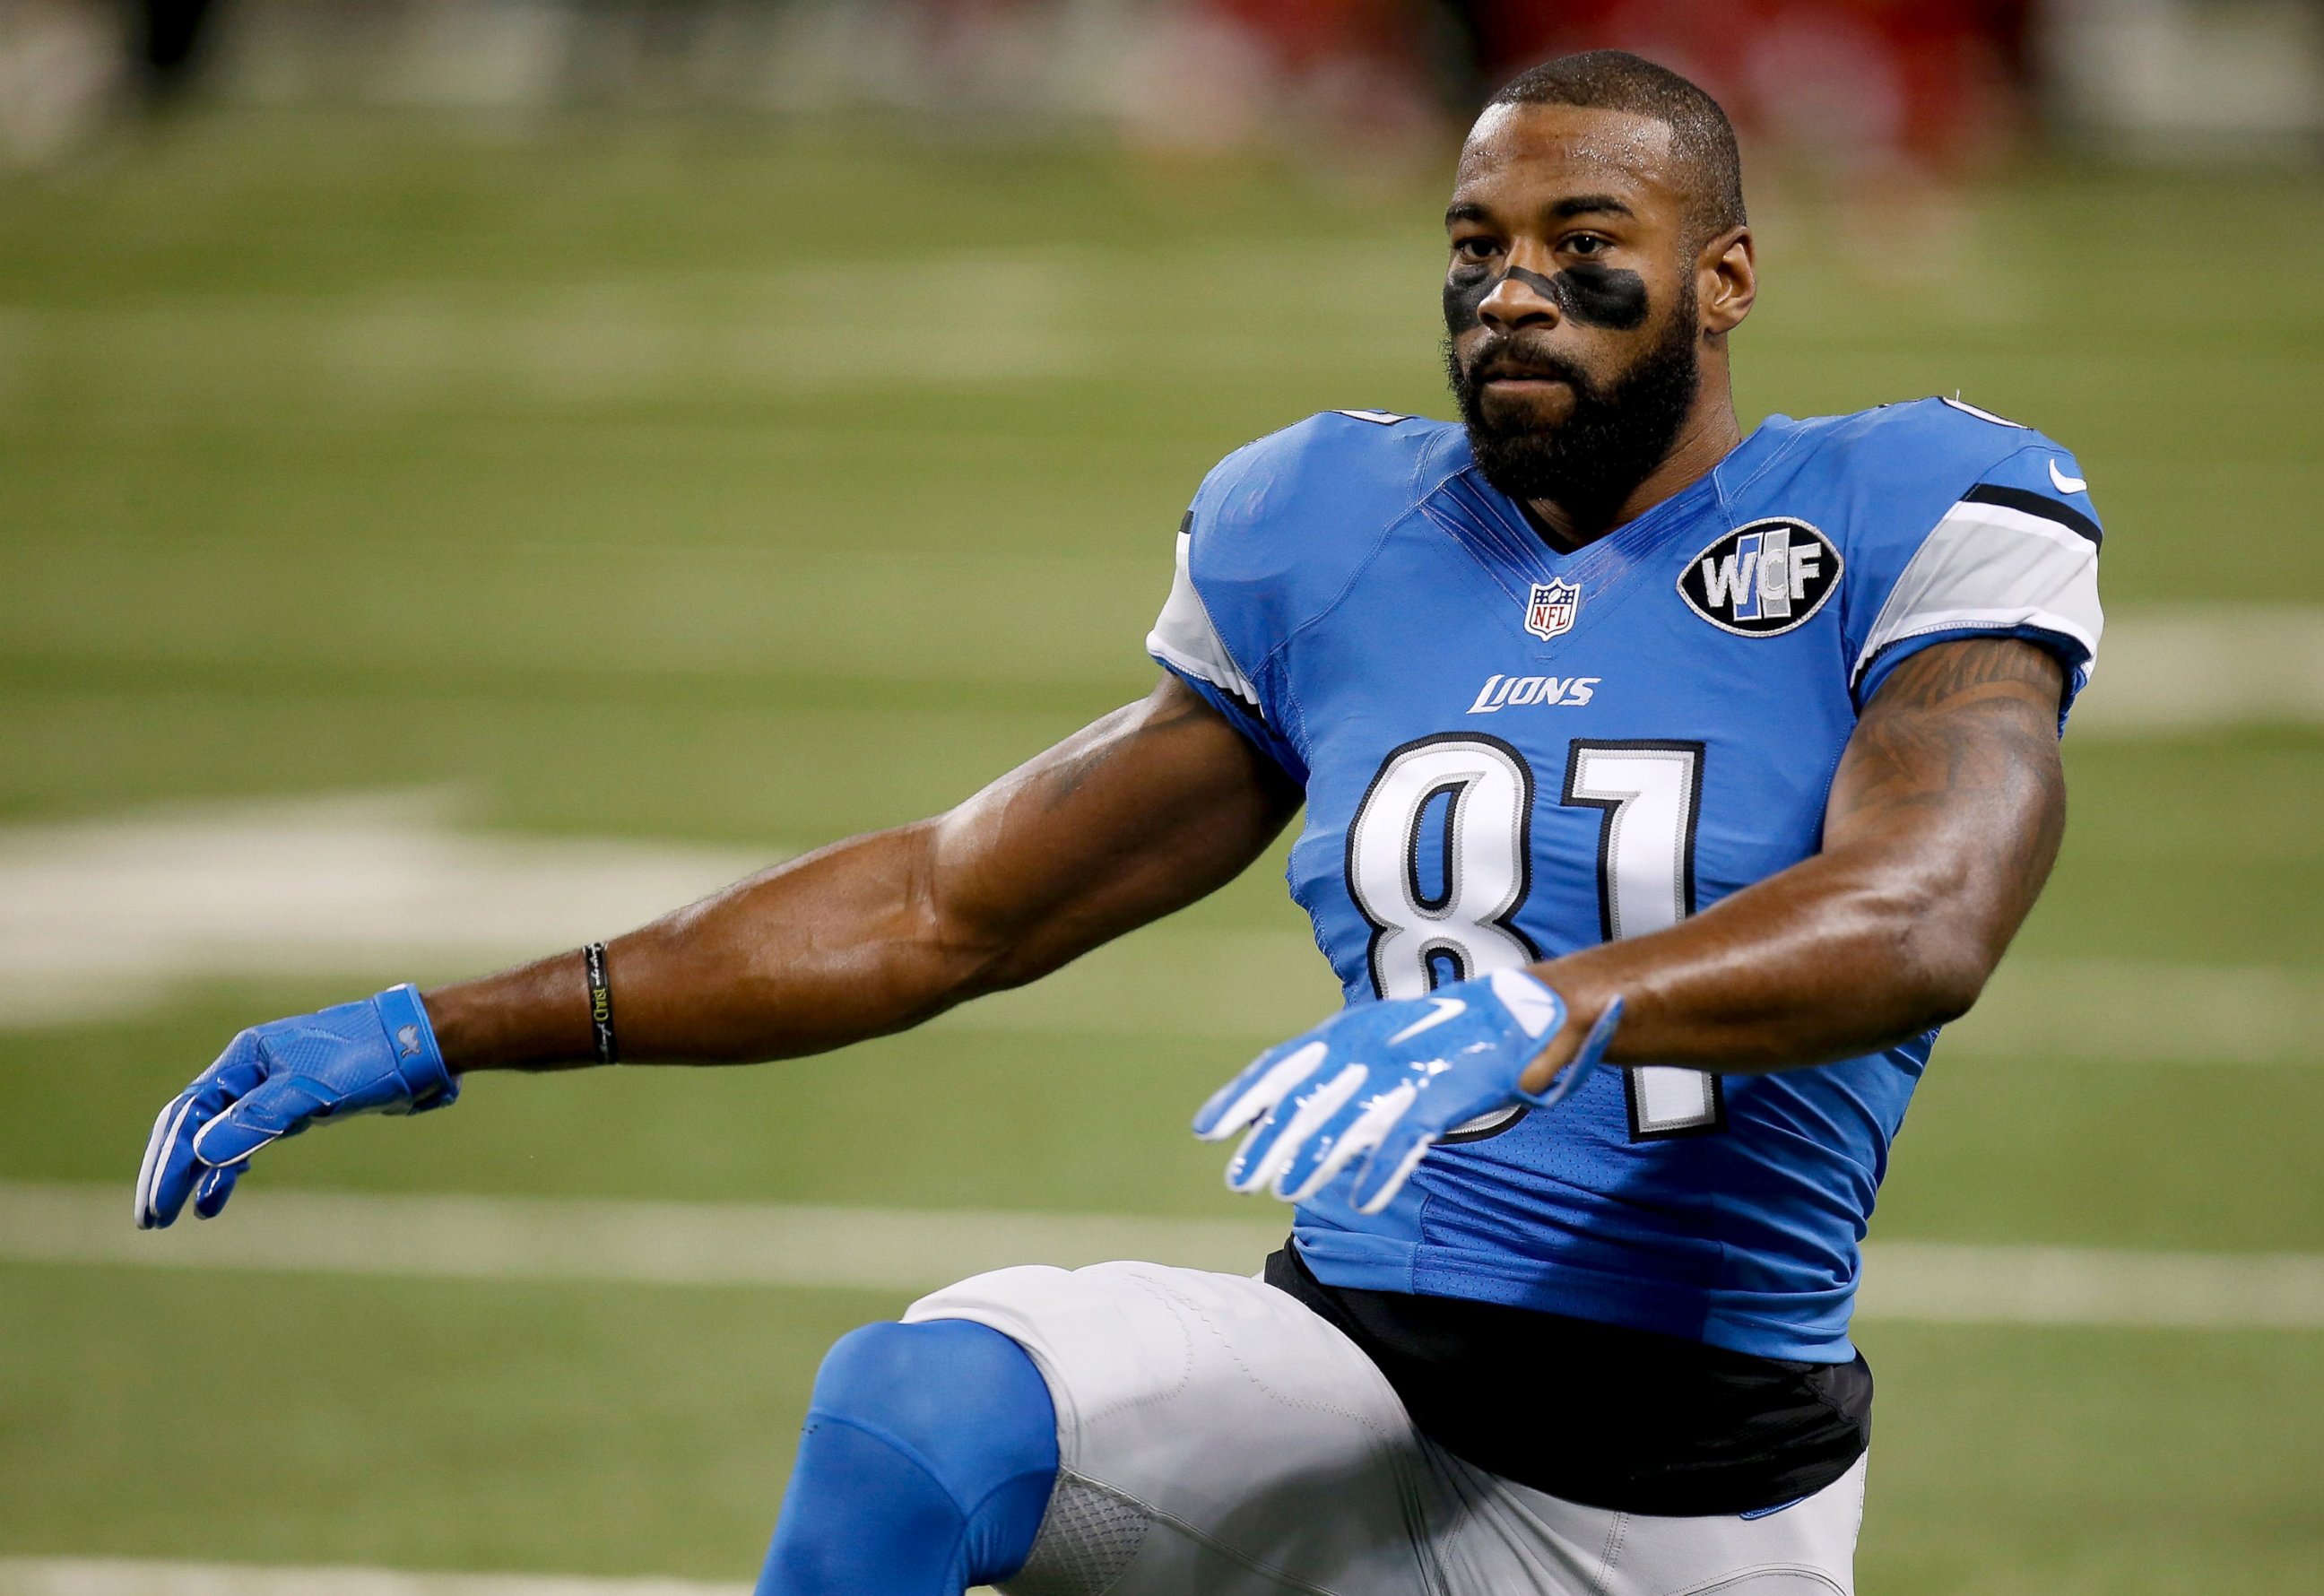 PHOTO: Calvin Johnson #81 of the Detroit Lions warms up prior to the game against the San Francisco 49ers at Ford Field, Dec. 27, 2015, in Detroit.